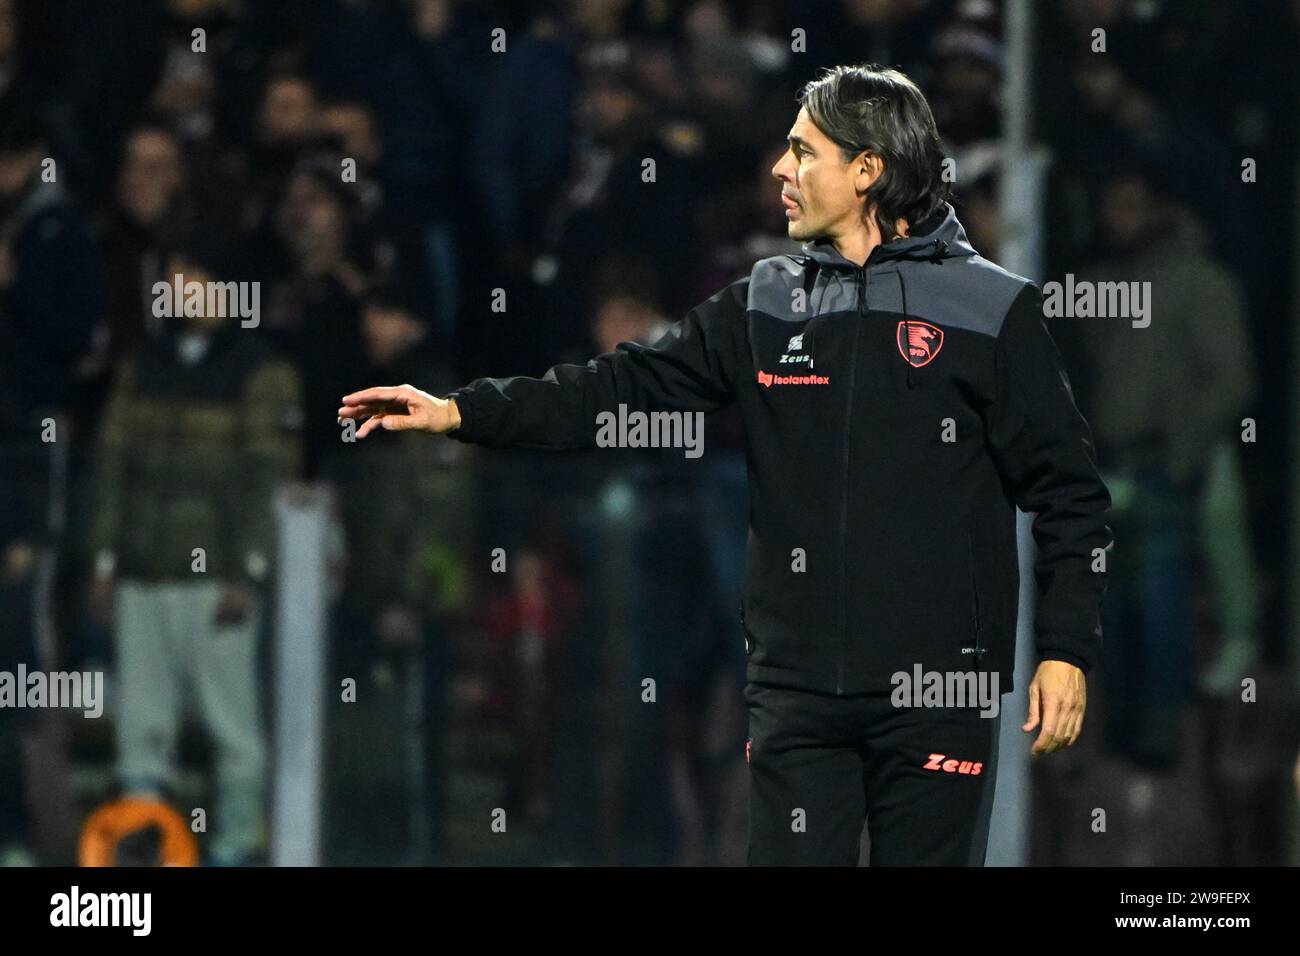 Filippo Inzaghi Head Coach of US Salernitana gestures during the Serie A match between US Salernitana and AC Milan at the Stadio Arechi Salerno Italy Stock Photo